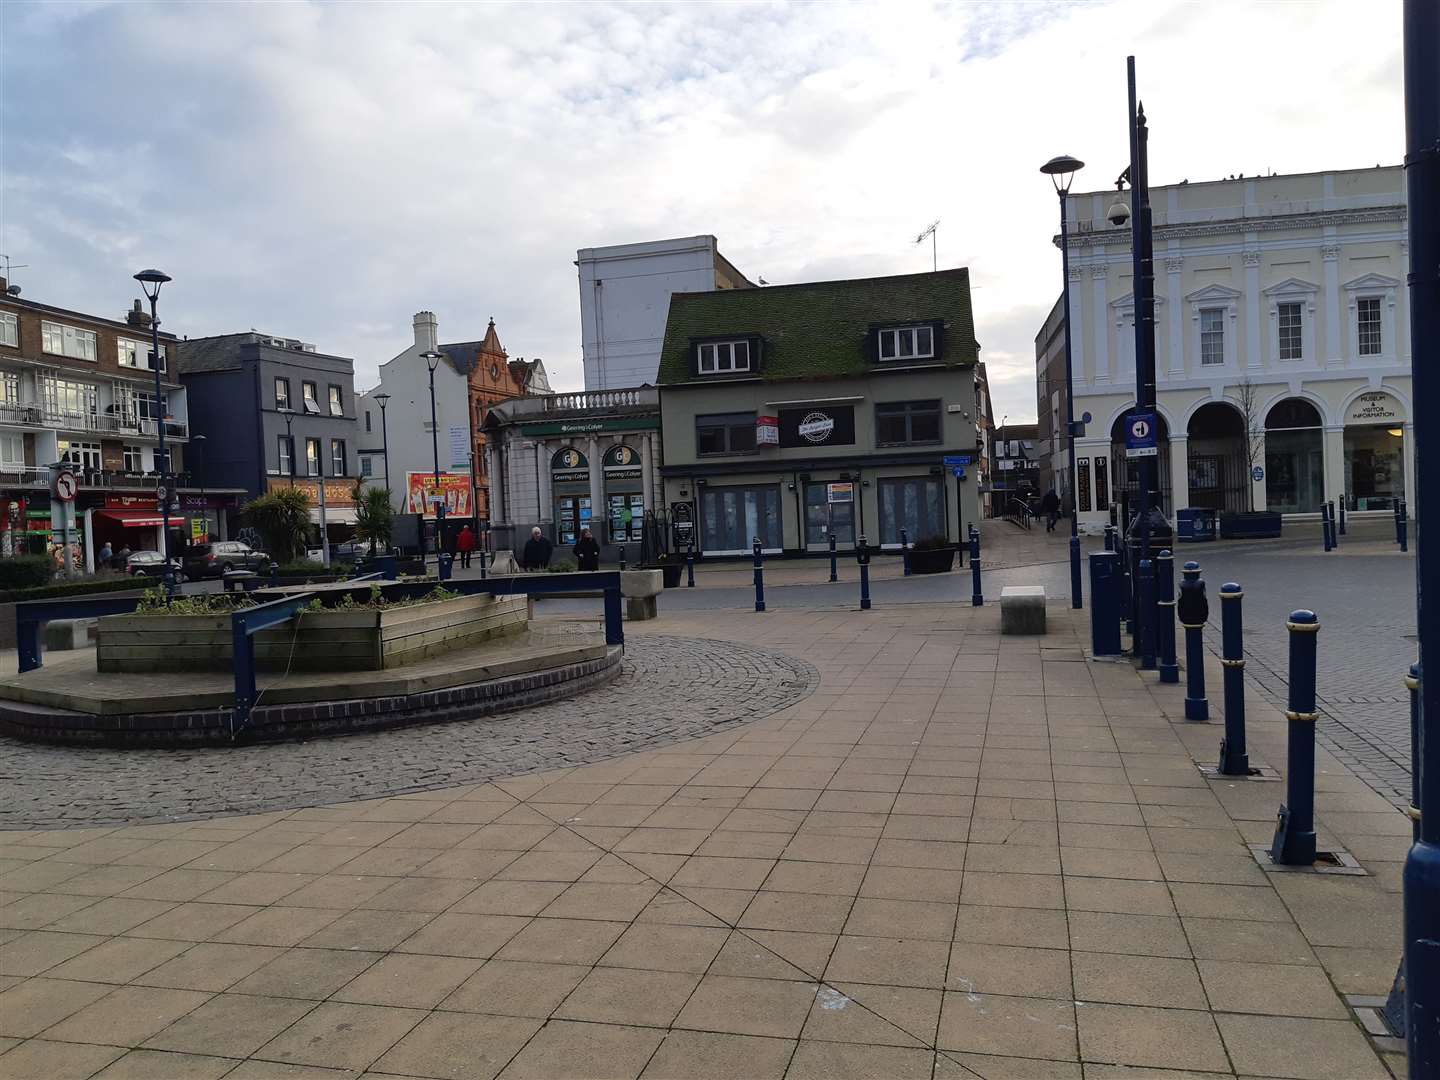 Market Square as it looks now.